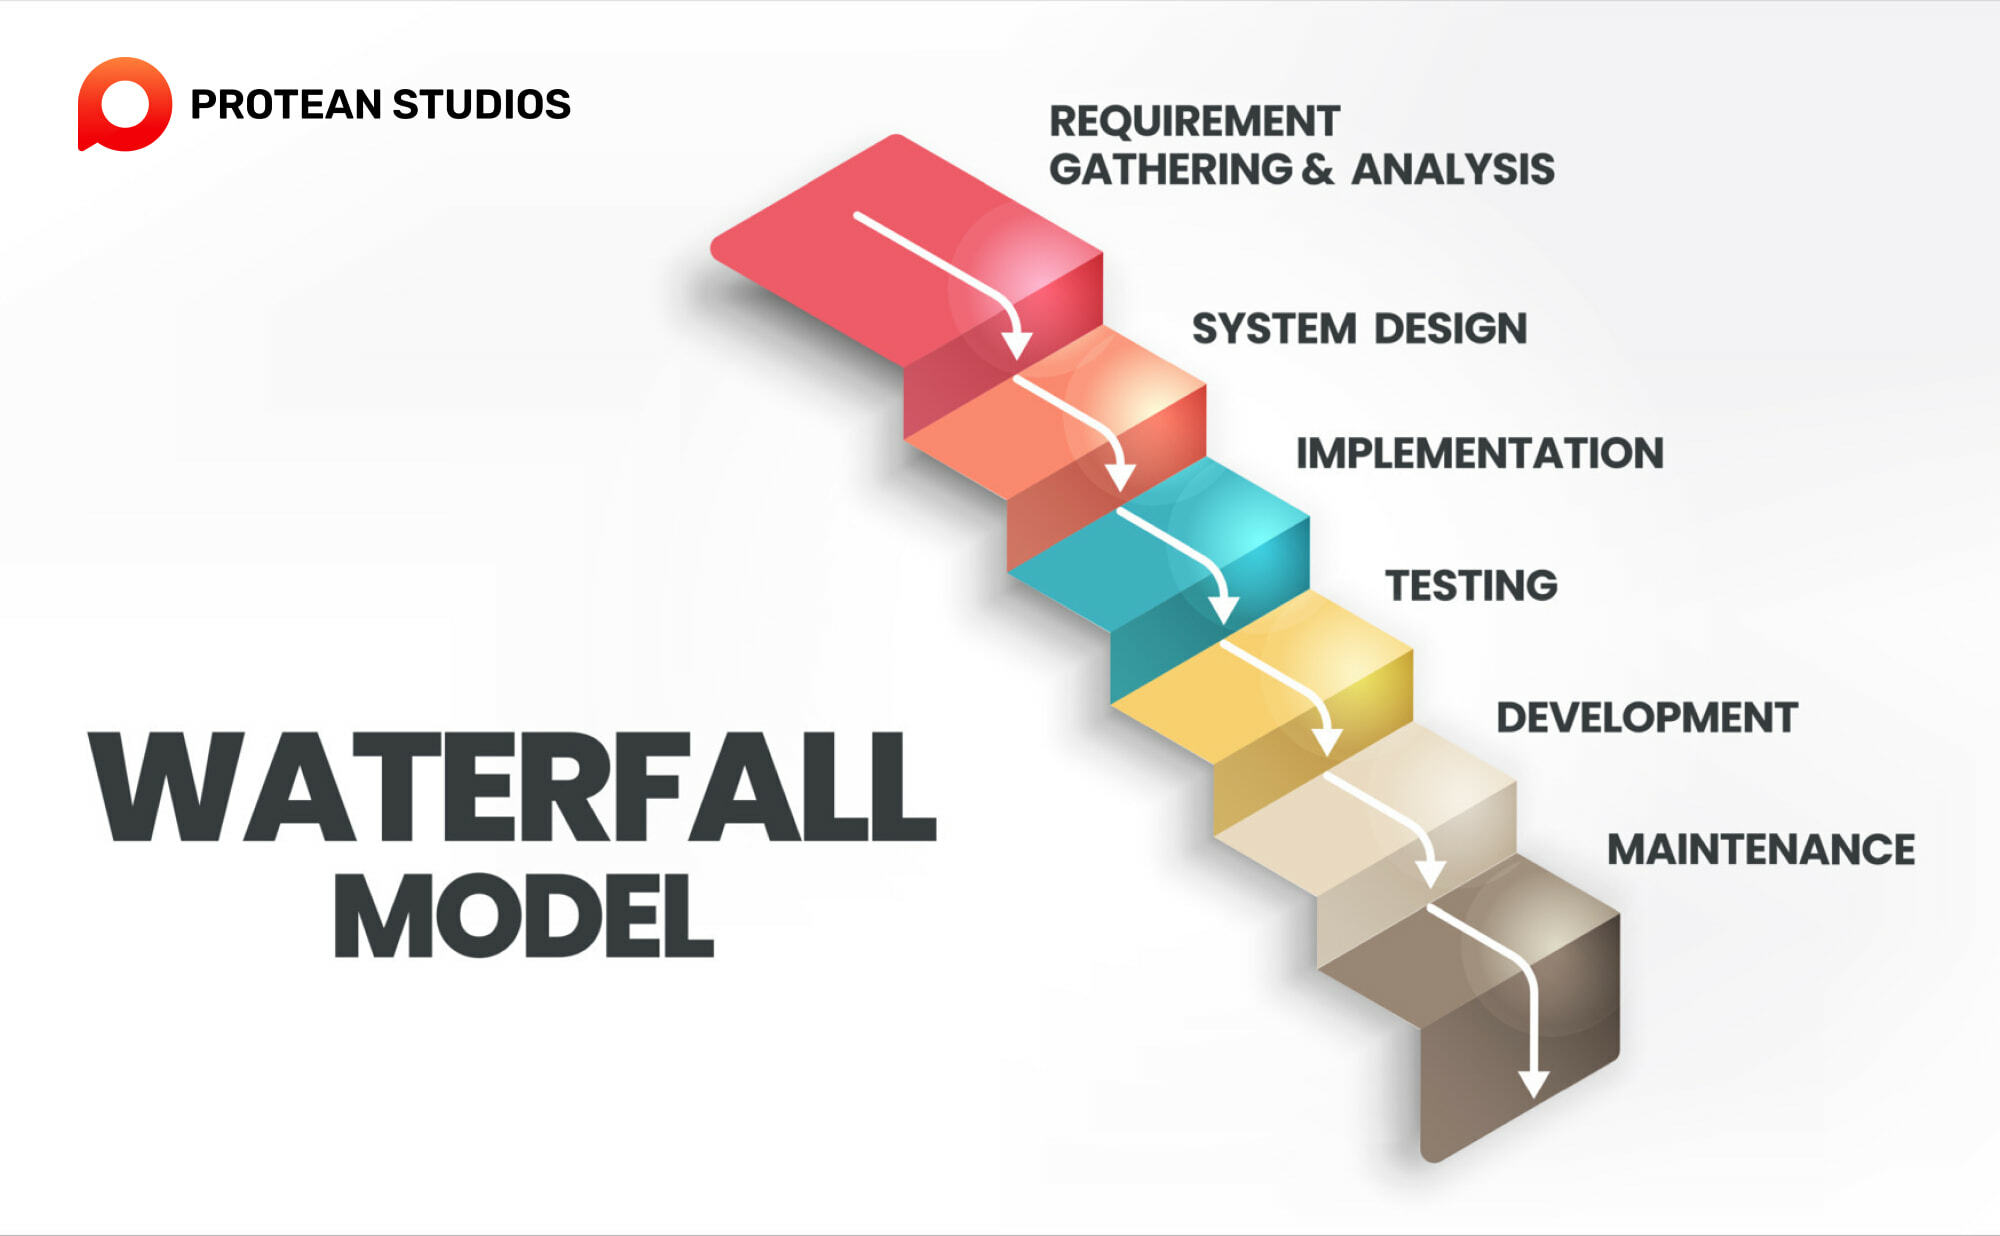 Some basic steps to run the waterfall model